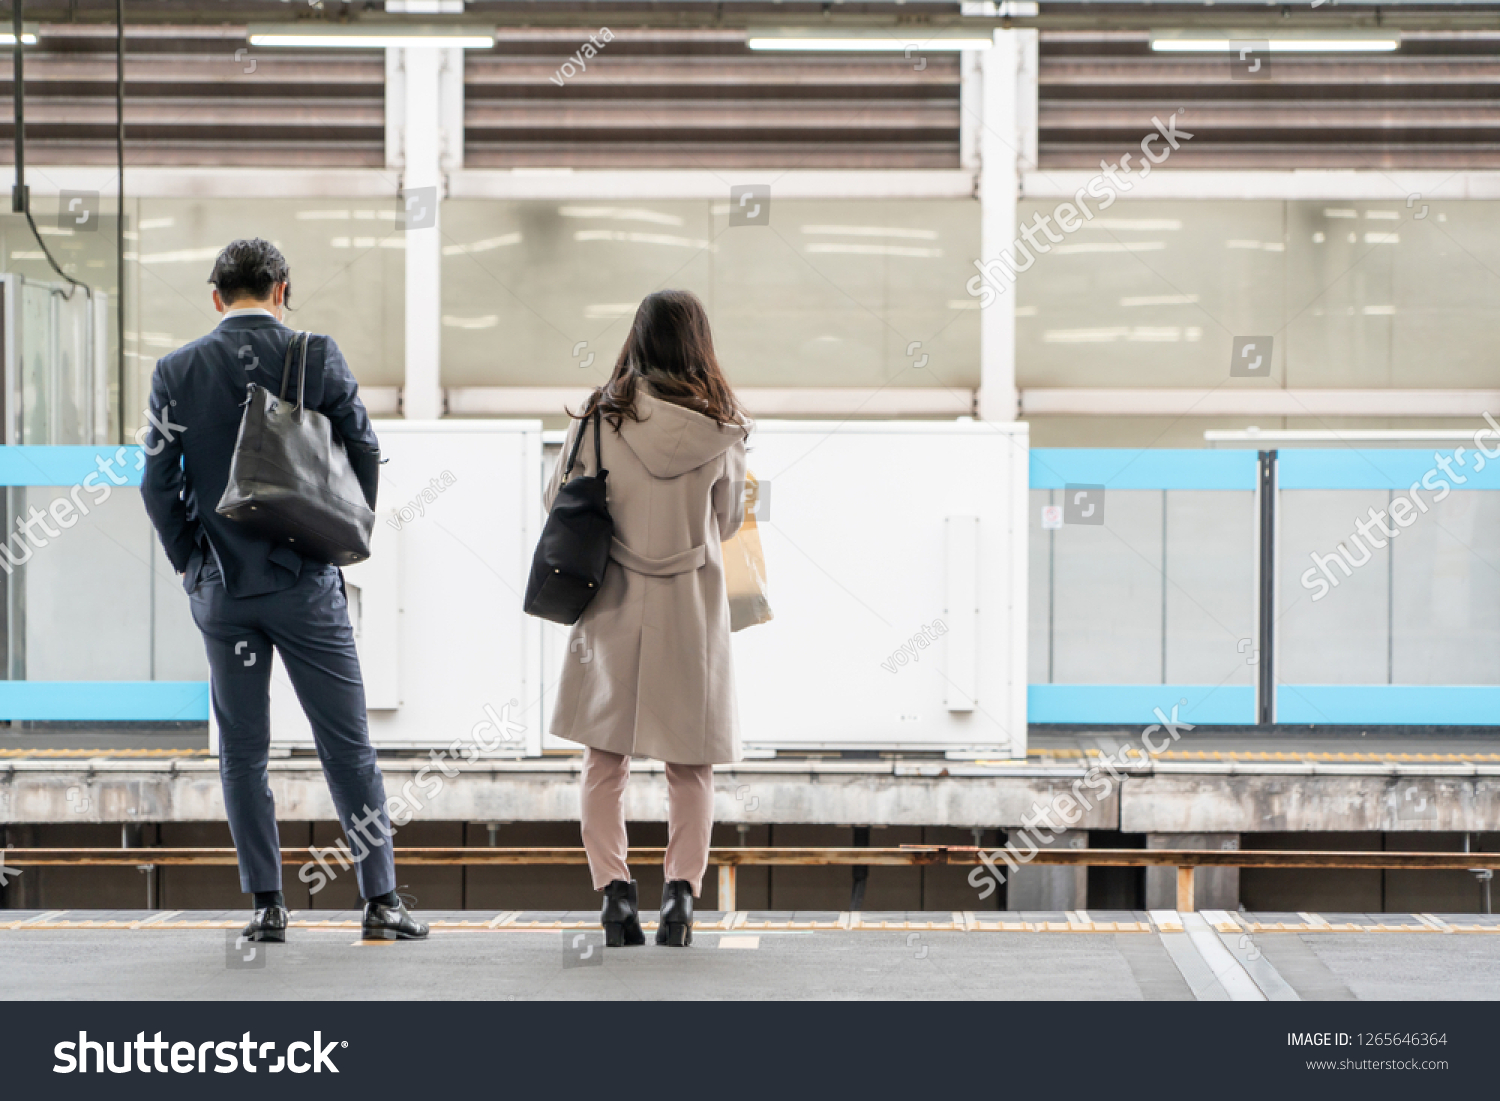 Asia Business concept for real estate and corporate construction - Asia business woman and man stand on train platform in background in Tokyo, Japan #1265646364